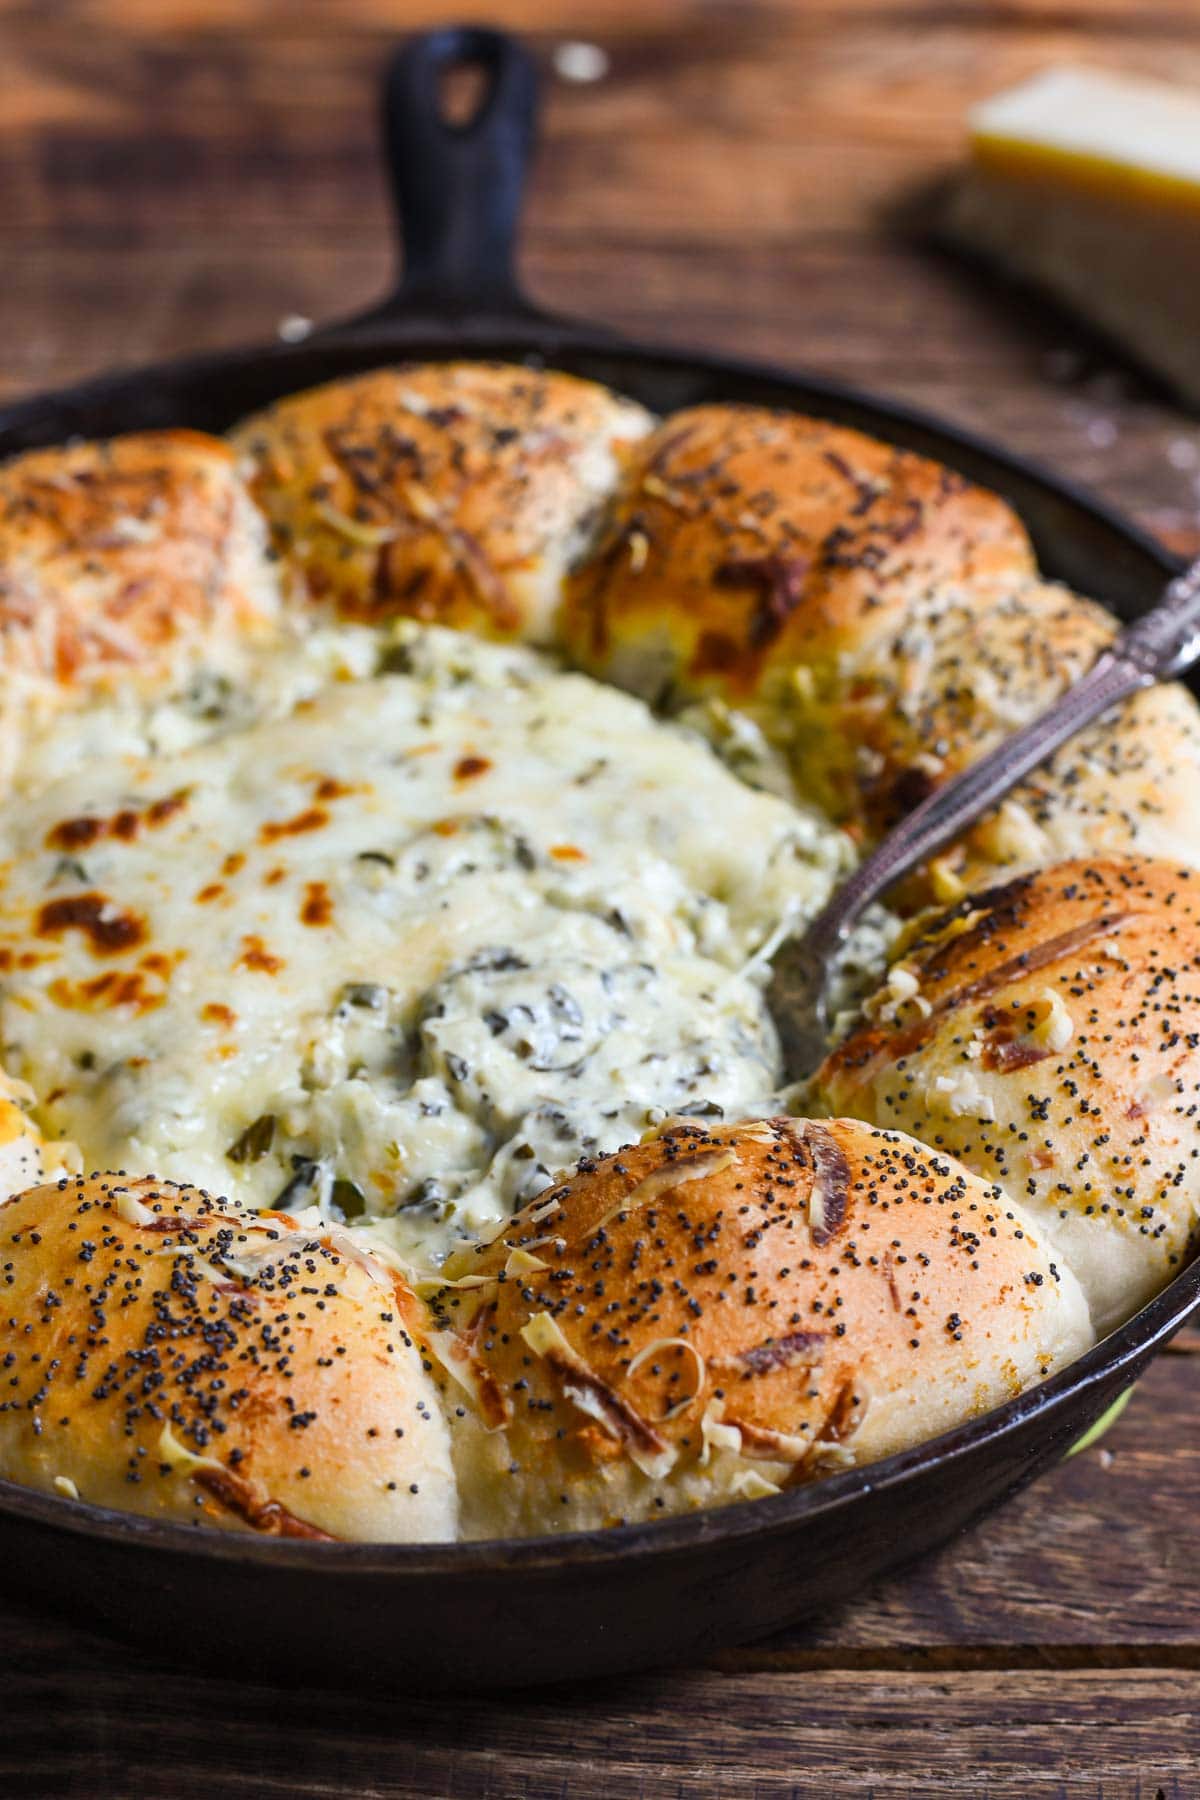 You can throw together this Skillet Bread and Spinach Artichoke Dip in only 15 minutes. This appetizer is a huge hit at parties! 